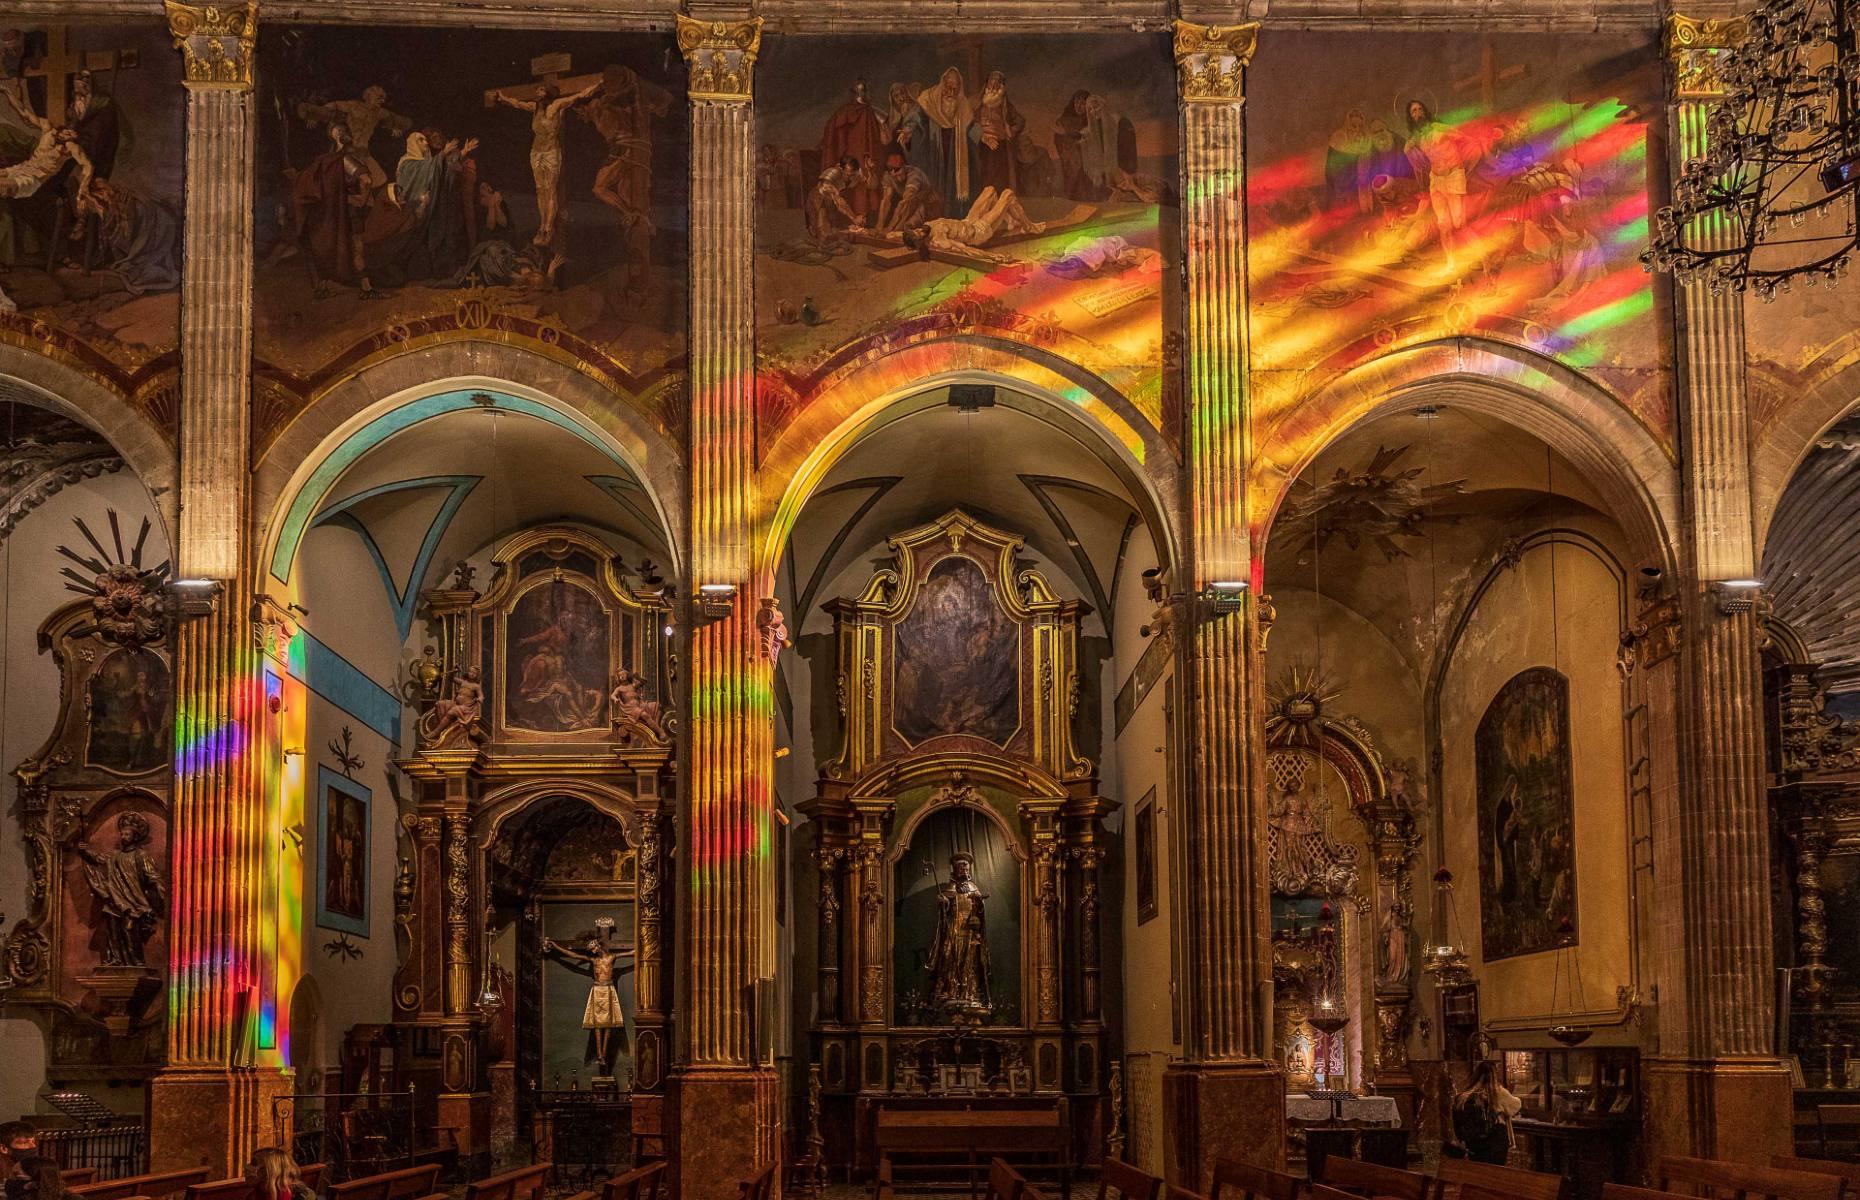 Dating back to the 13th century, the Church of Our Lady of the Angels was built by the Knights Templar. It's made totally mesmerizing in this shot by Bella Falk, which shows light shining through the stained-glass windows to create a kaleidoscopic image on the historic walls. Judge Fiona Shields said, "I absolutely love the play of light from the stained glass windows creating such a glorious scene."